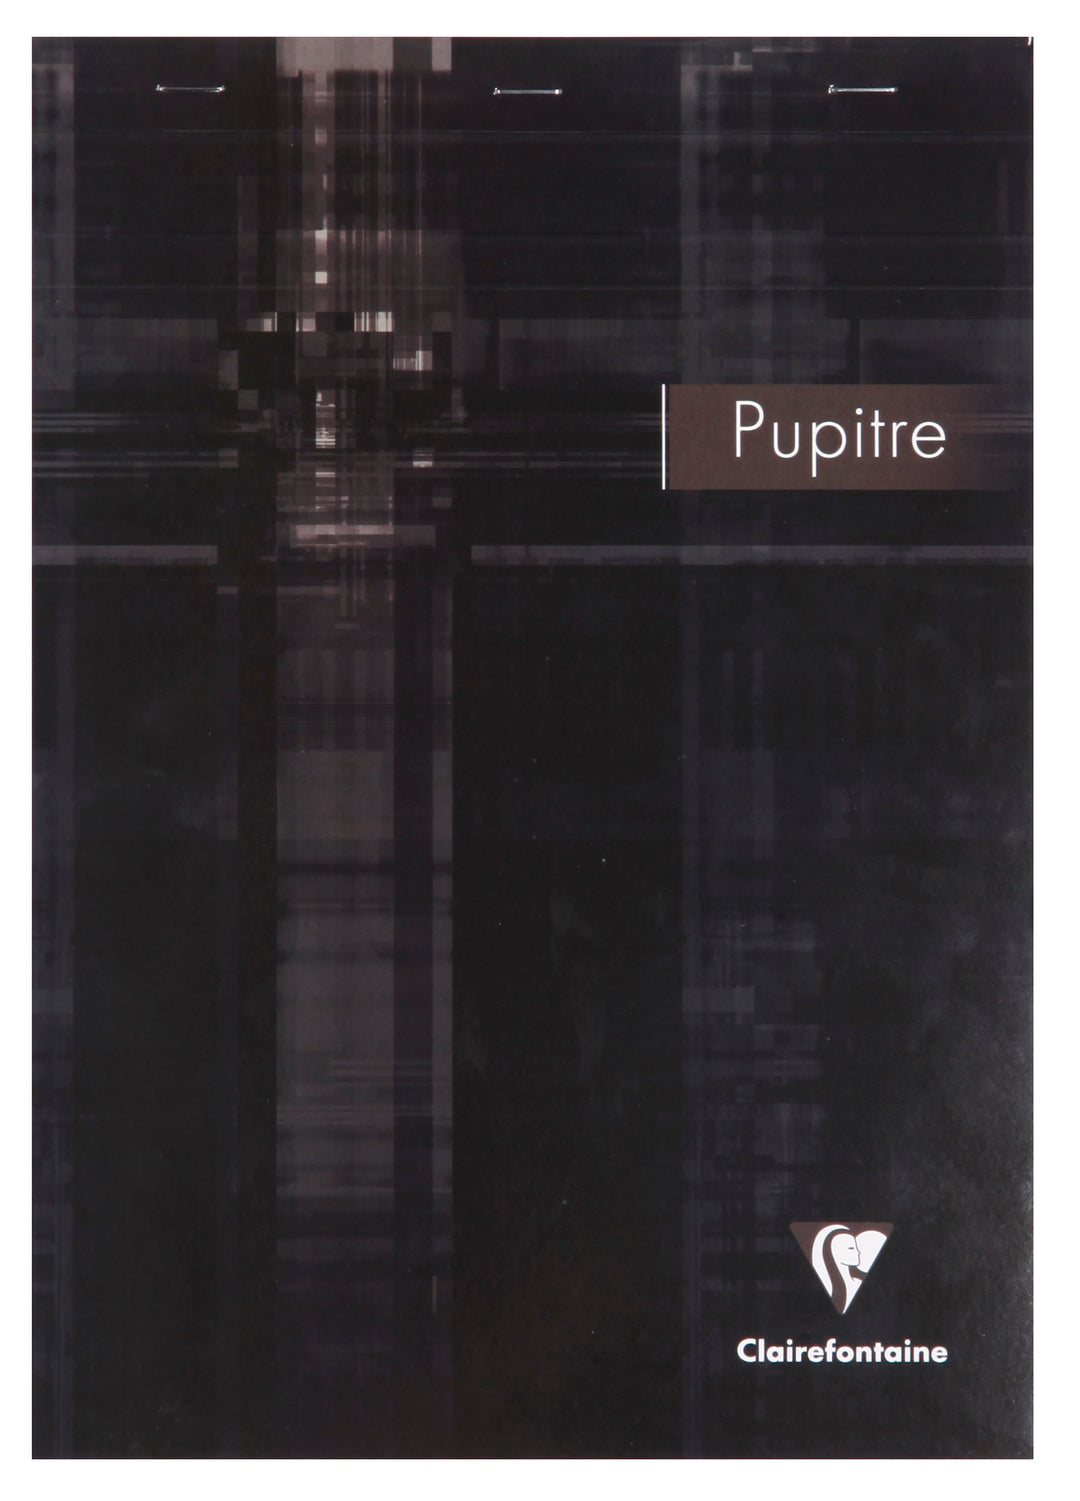 Clairefontaine Pupitre Stapled Line + Margin Ruled Notepad - A4